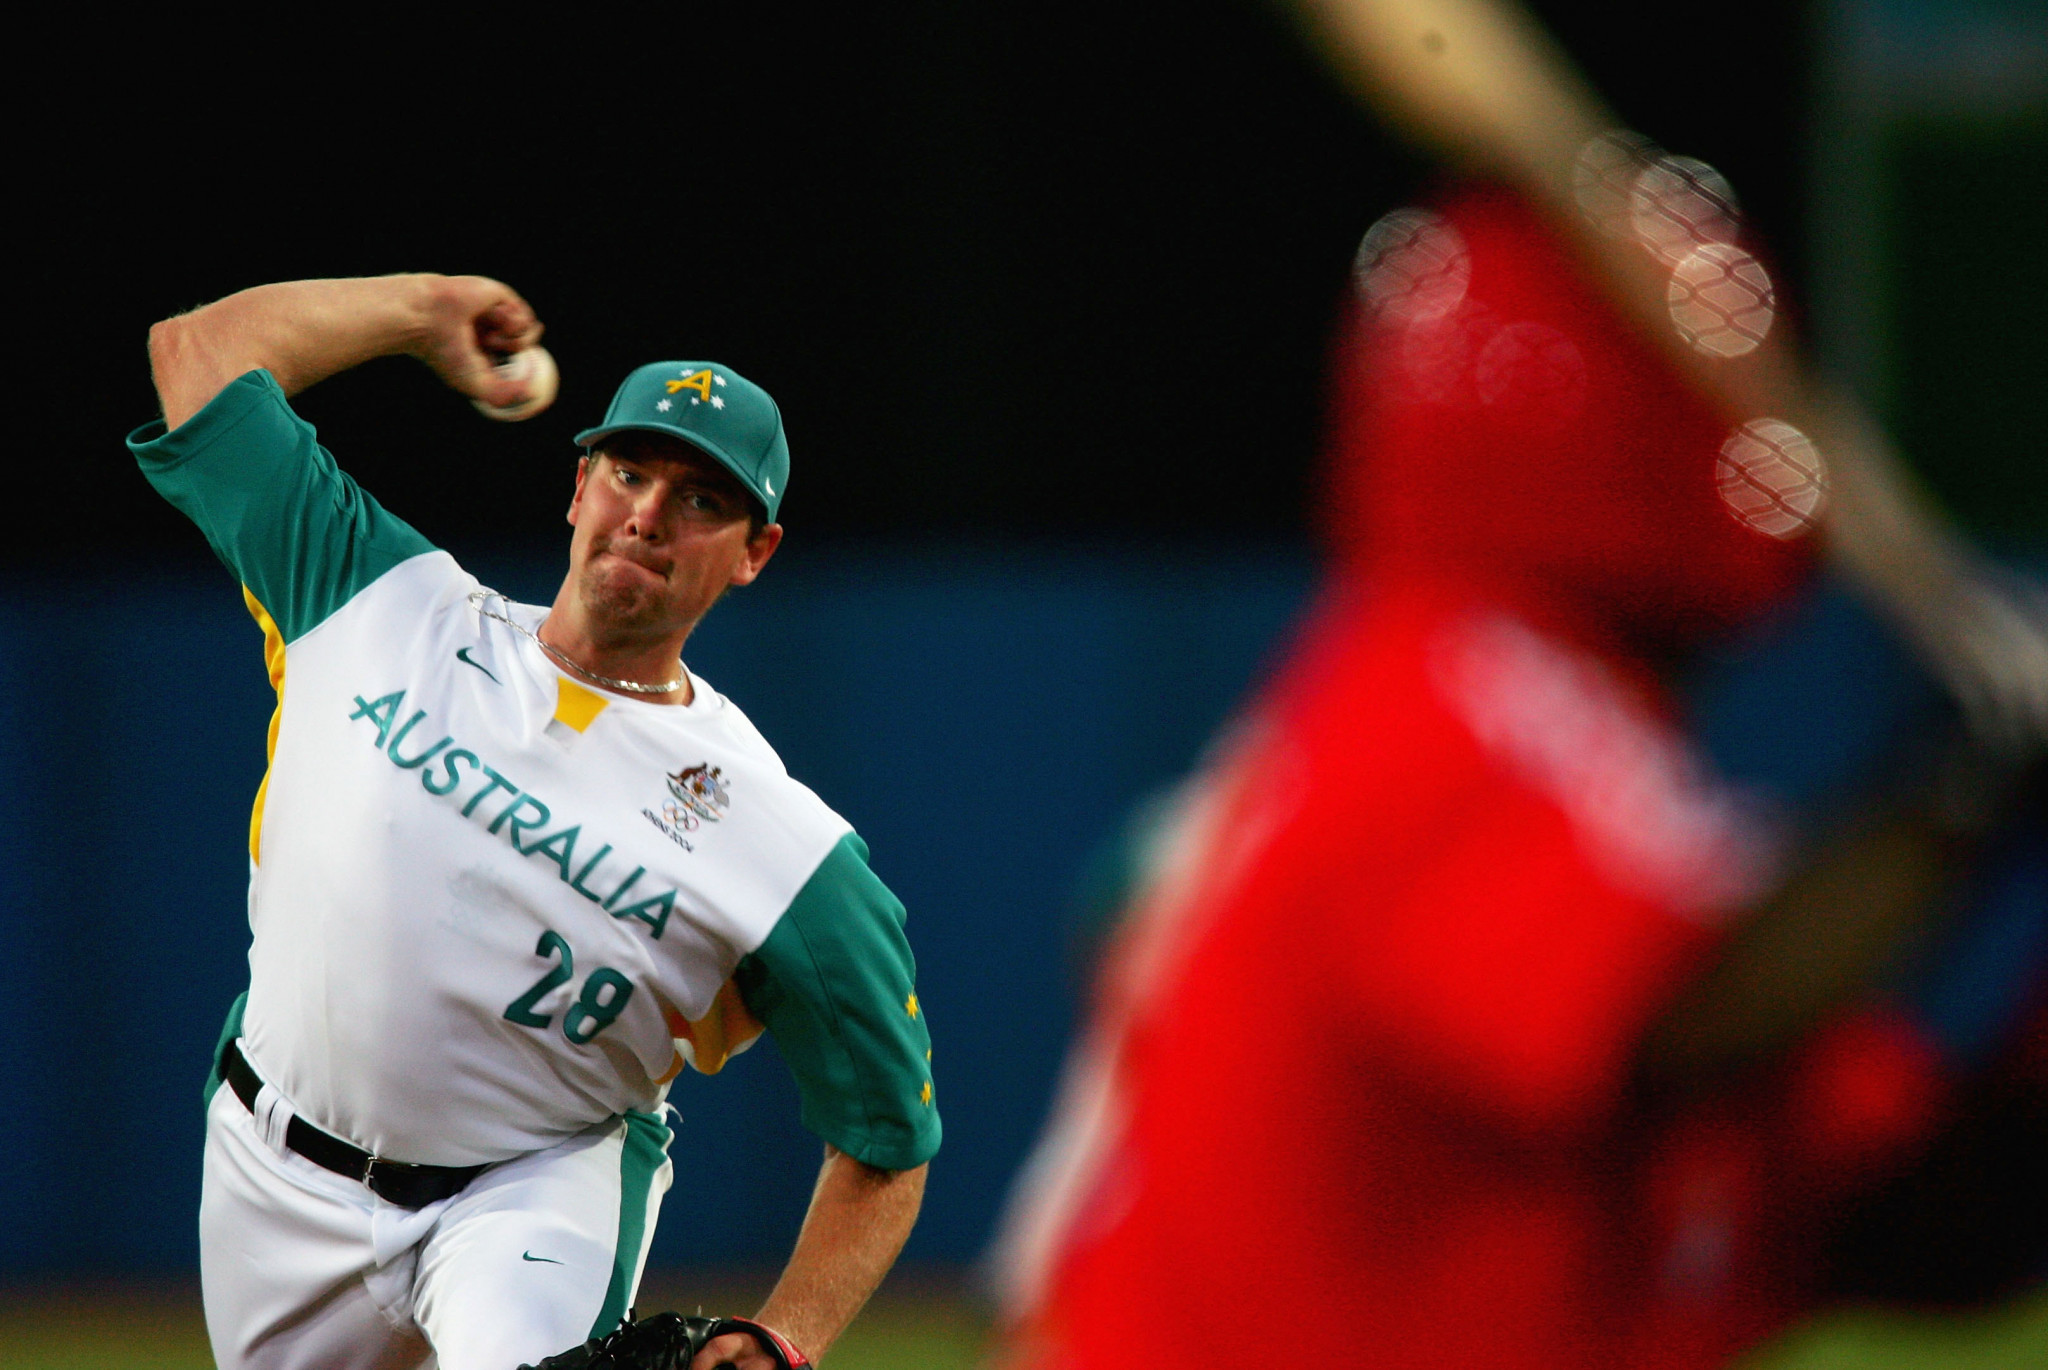 Baseball Australia's decision to withdraw from the WBSC Final Olympic Qualifier for Tokyo 2020 ends the team's chances of improving on the silver medal they won at Athens 2004 ©Getty Images